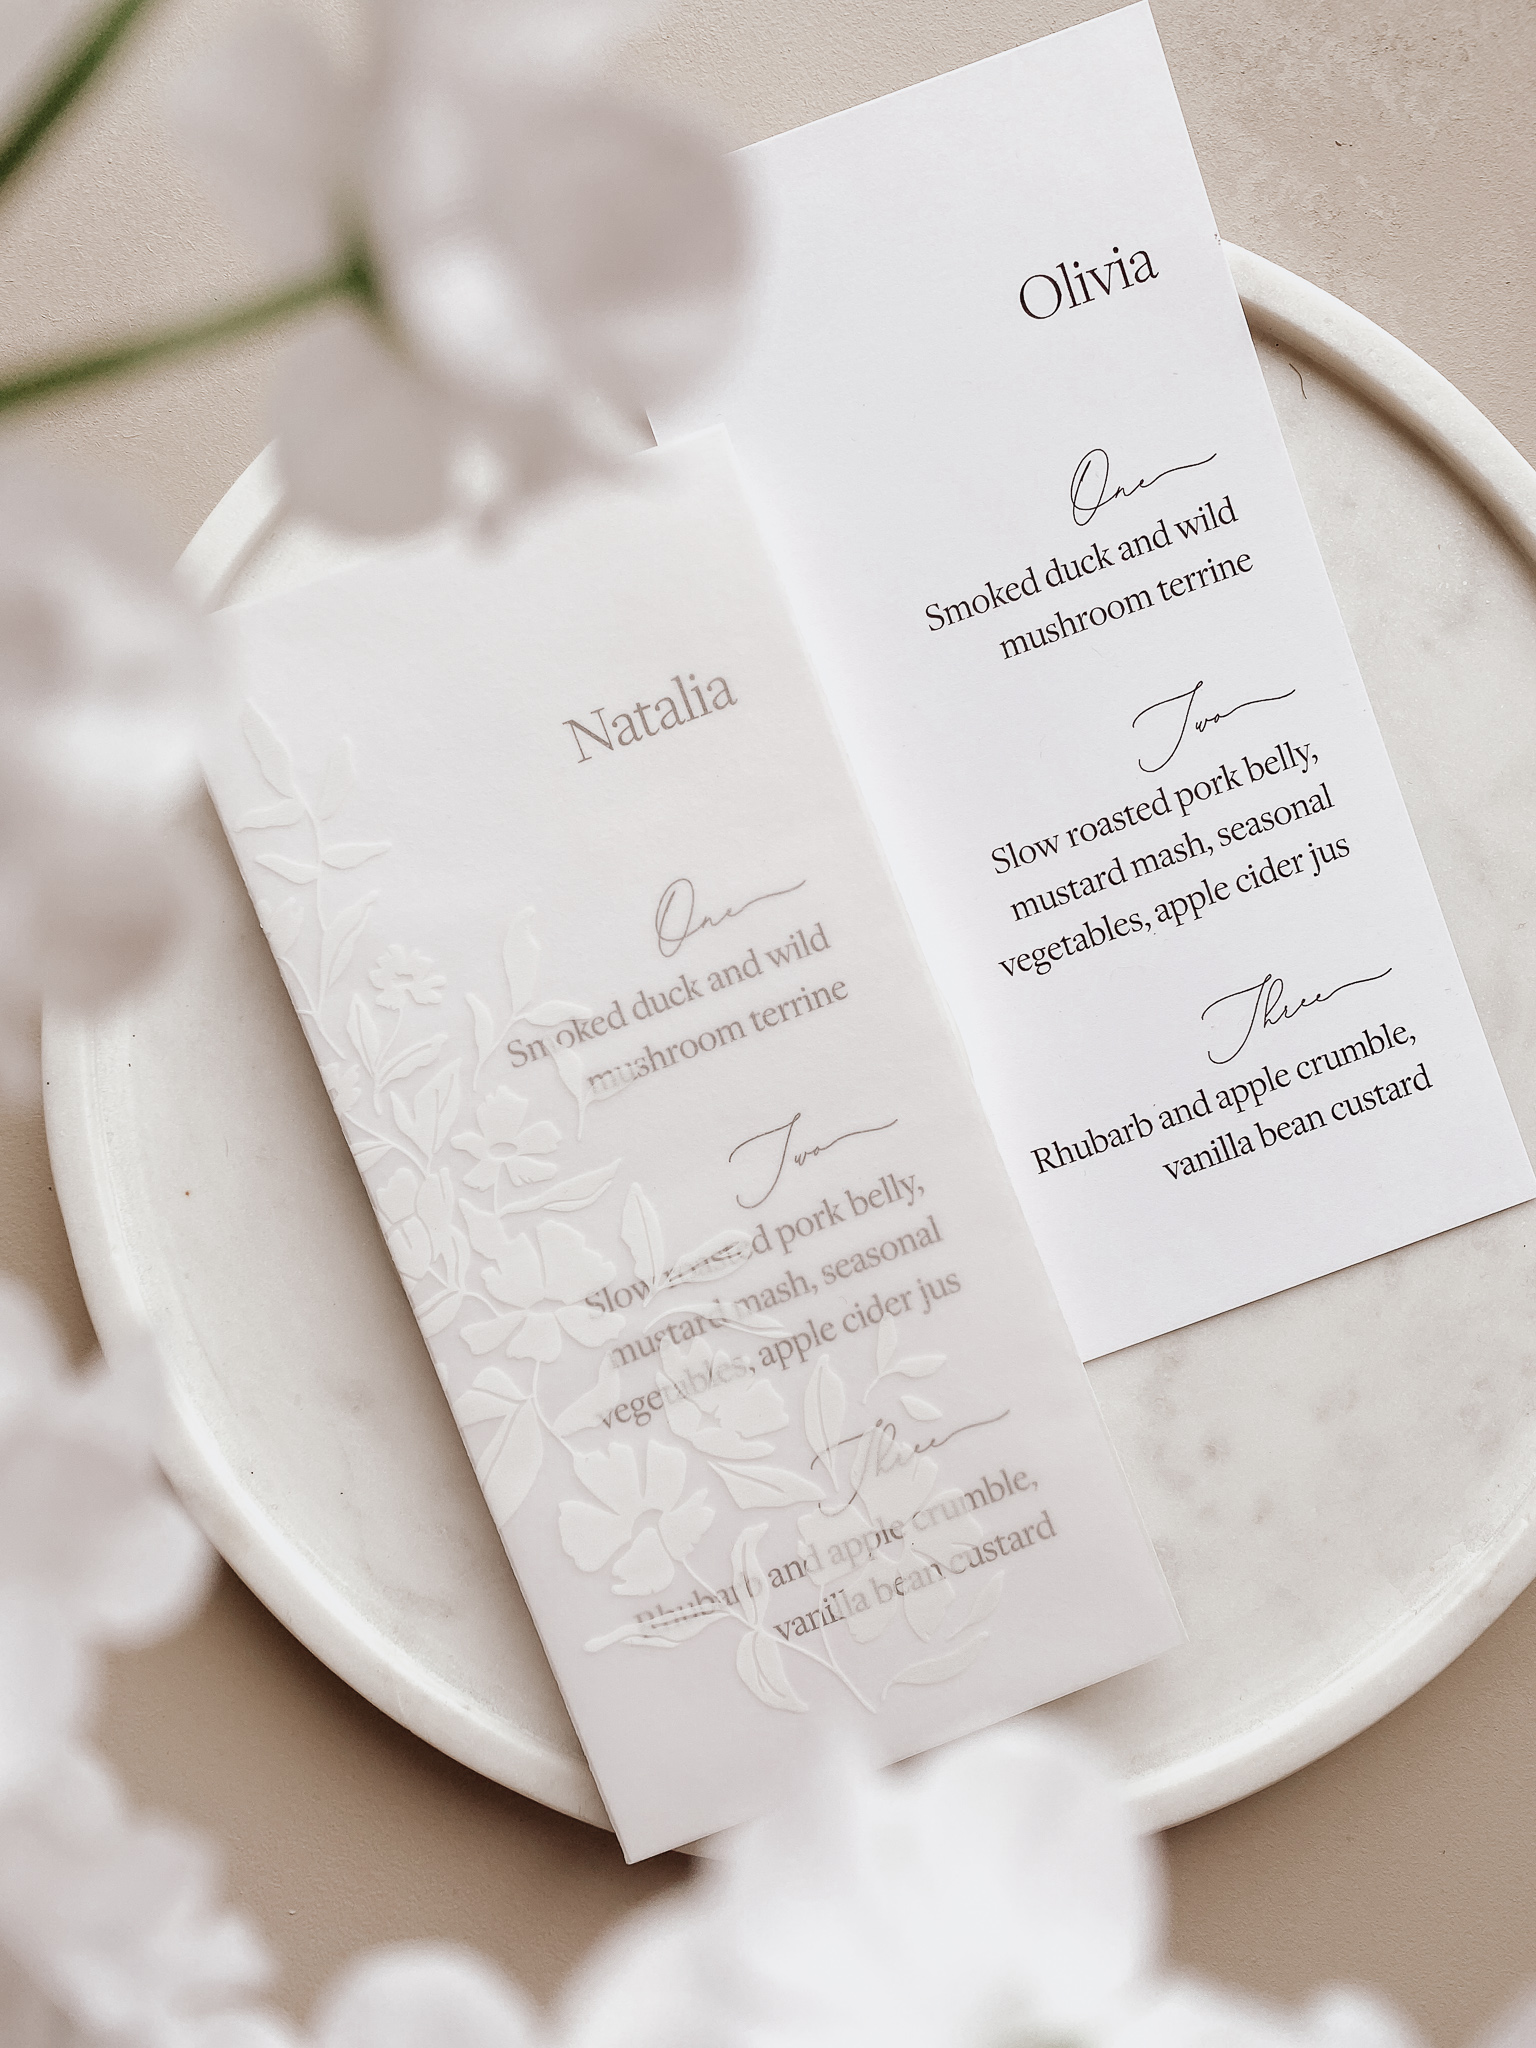 Modern wedding menu cards wrapped in a vellum sleeve decorated with white ink flowers.